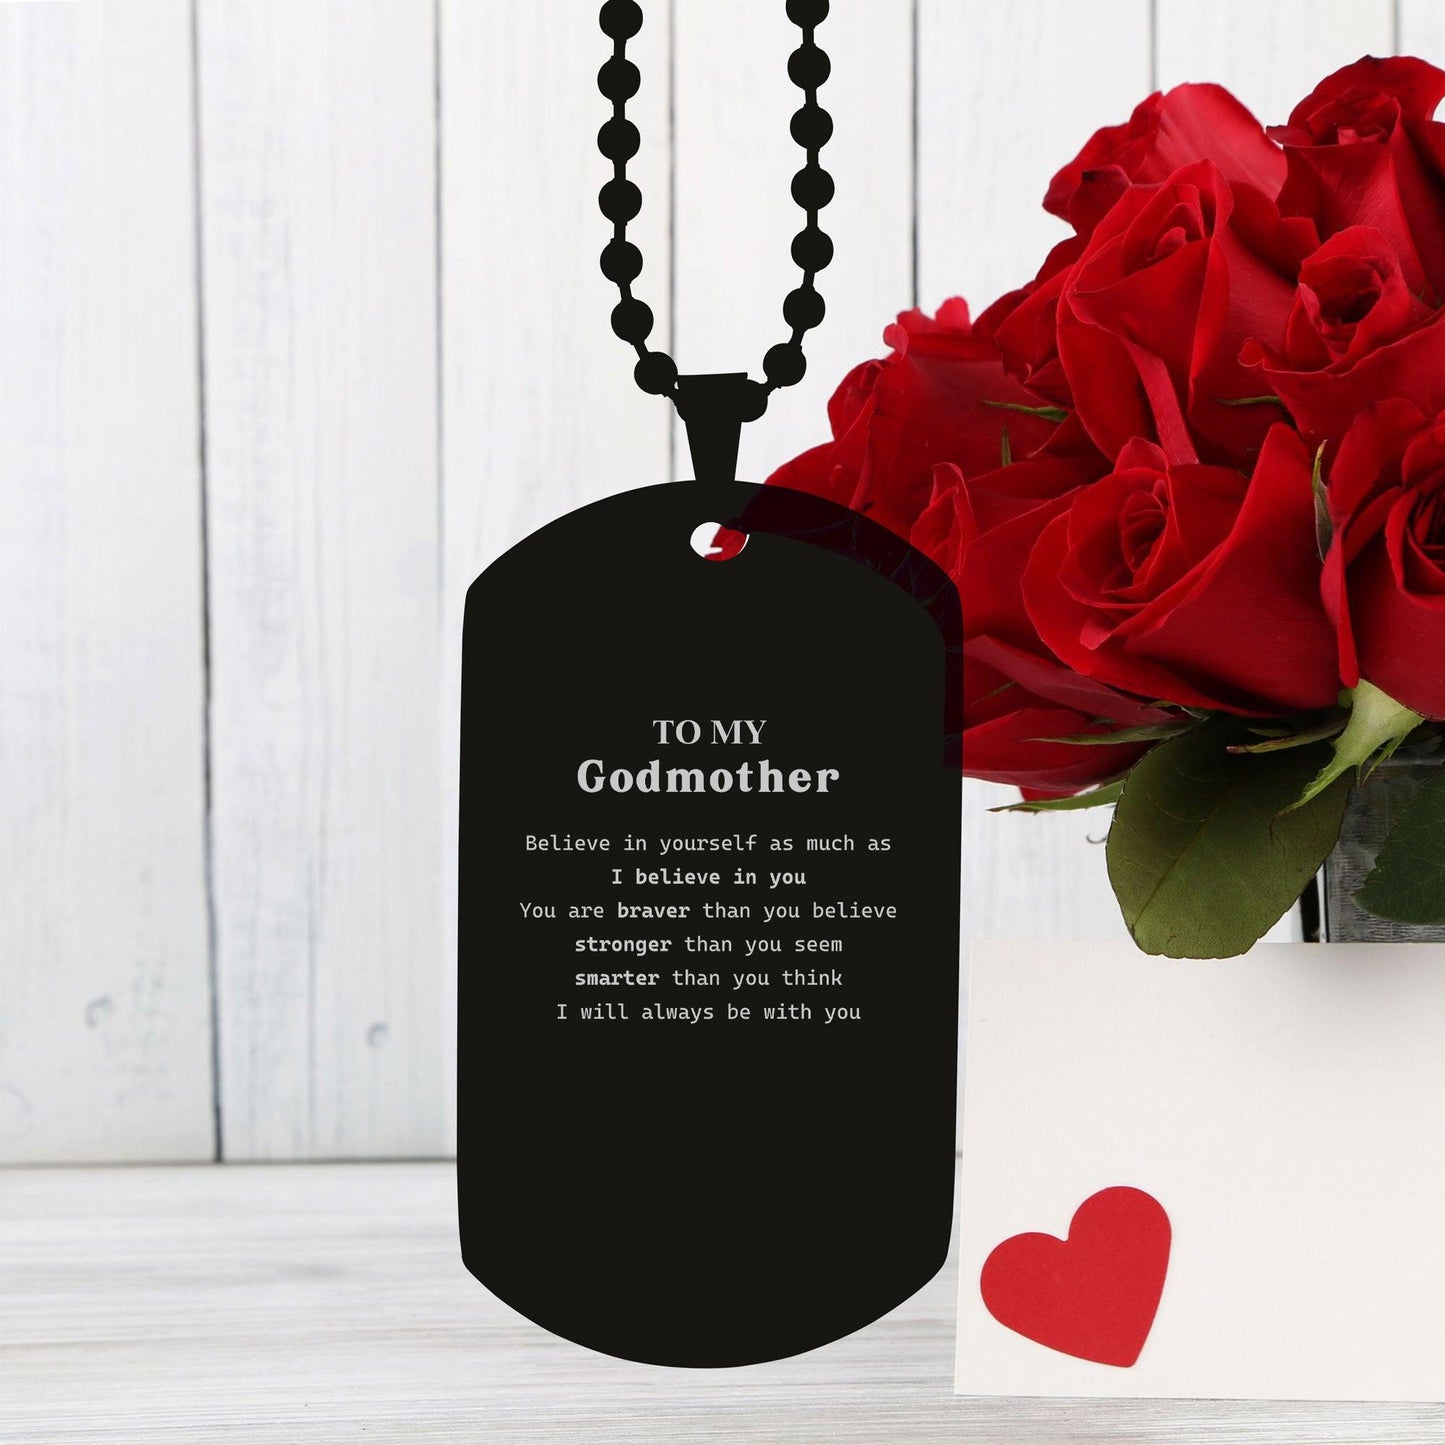 Godmother Black Dog Tag Engraved Necklace - You are braver than you believe, stronger than you seem, Inspirational Birthday Christmas Mother's Day Gifts - Mallard Moon Gift Shop